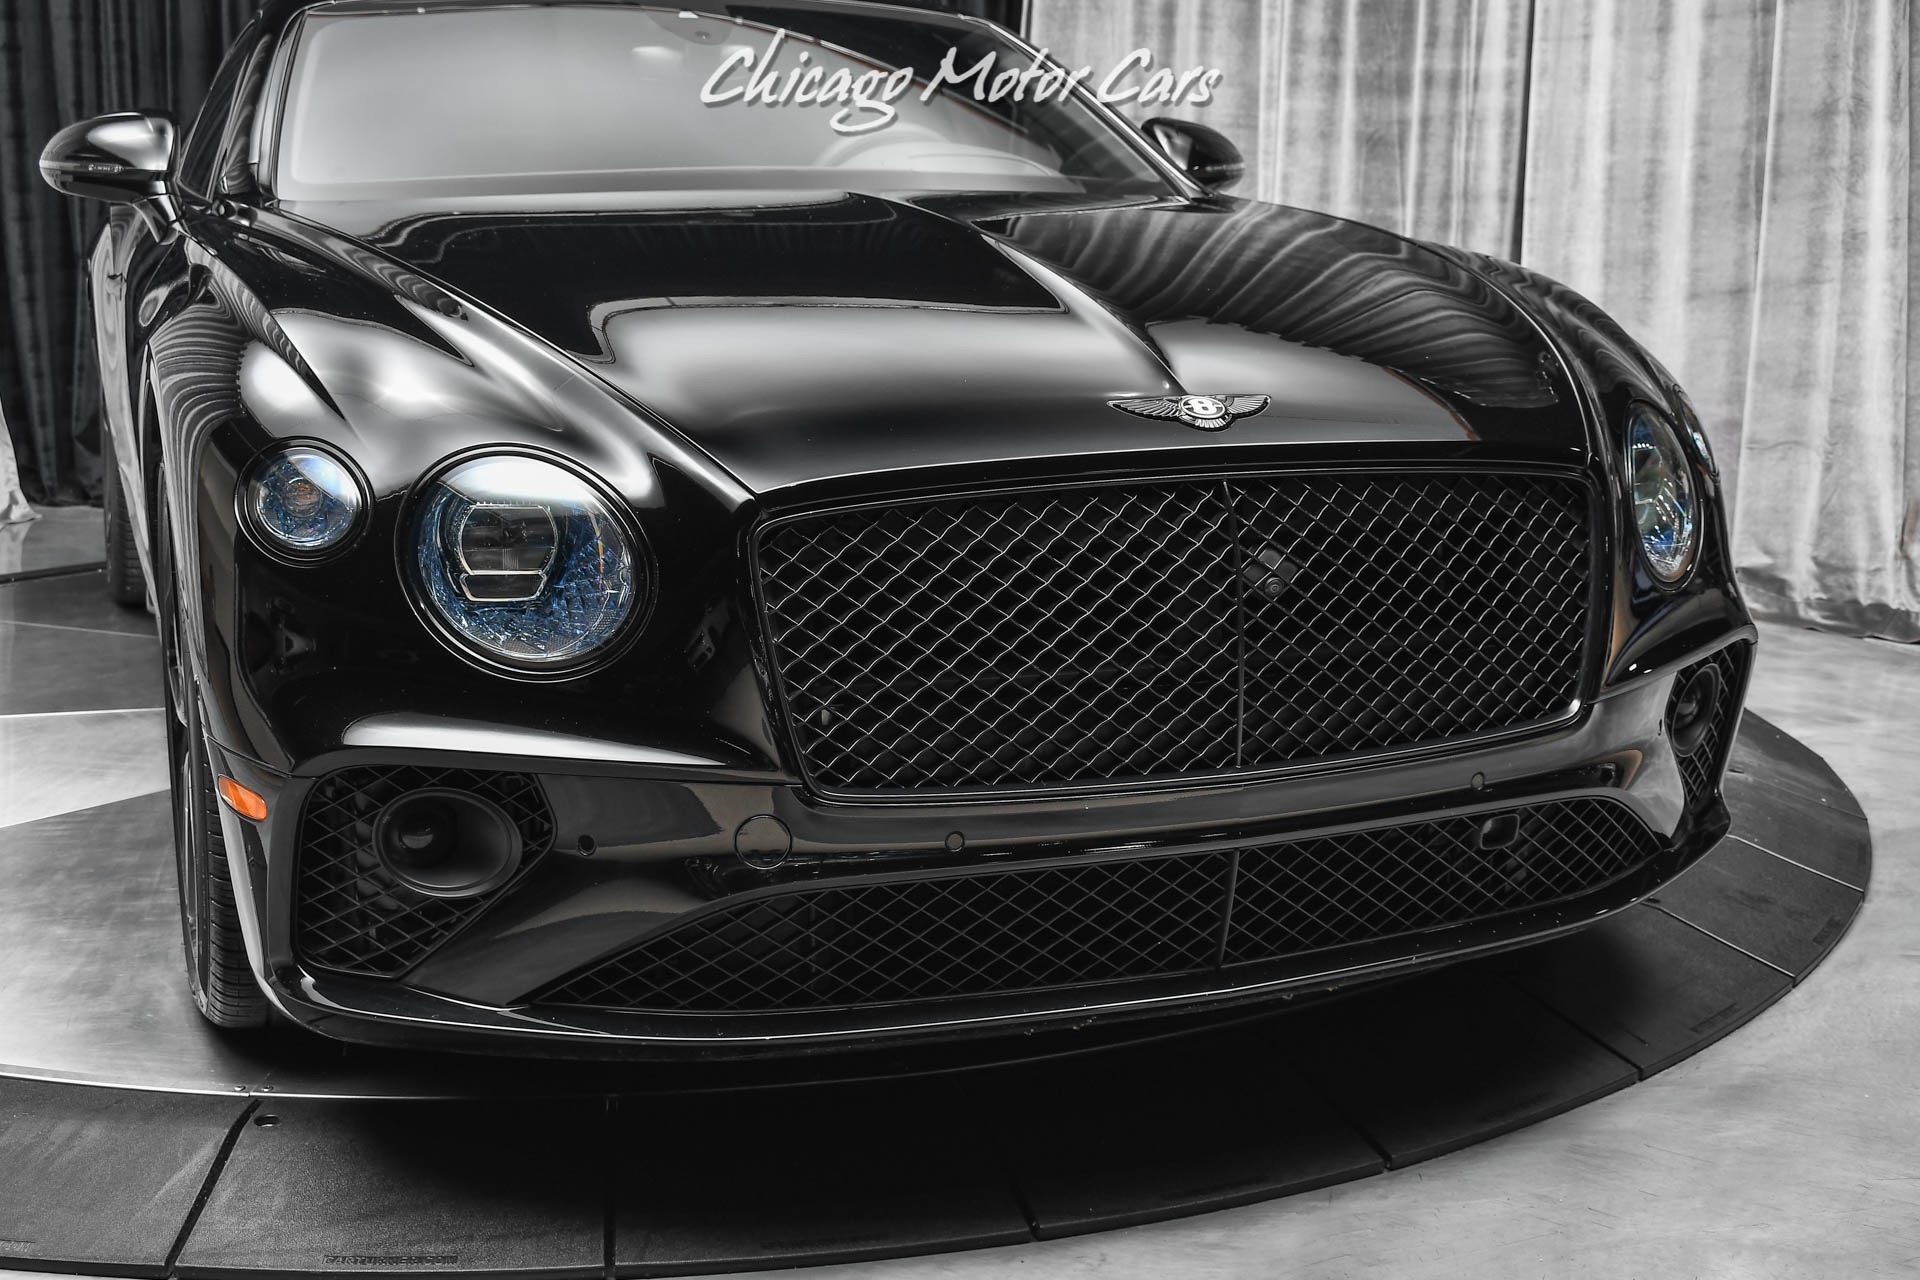 Used-2020-Bentley-Continental-GT-Coupe-MSRP-291892-Loaded-Stunning-Spec-TRIPLE-BLACK-COMBO